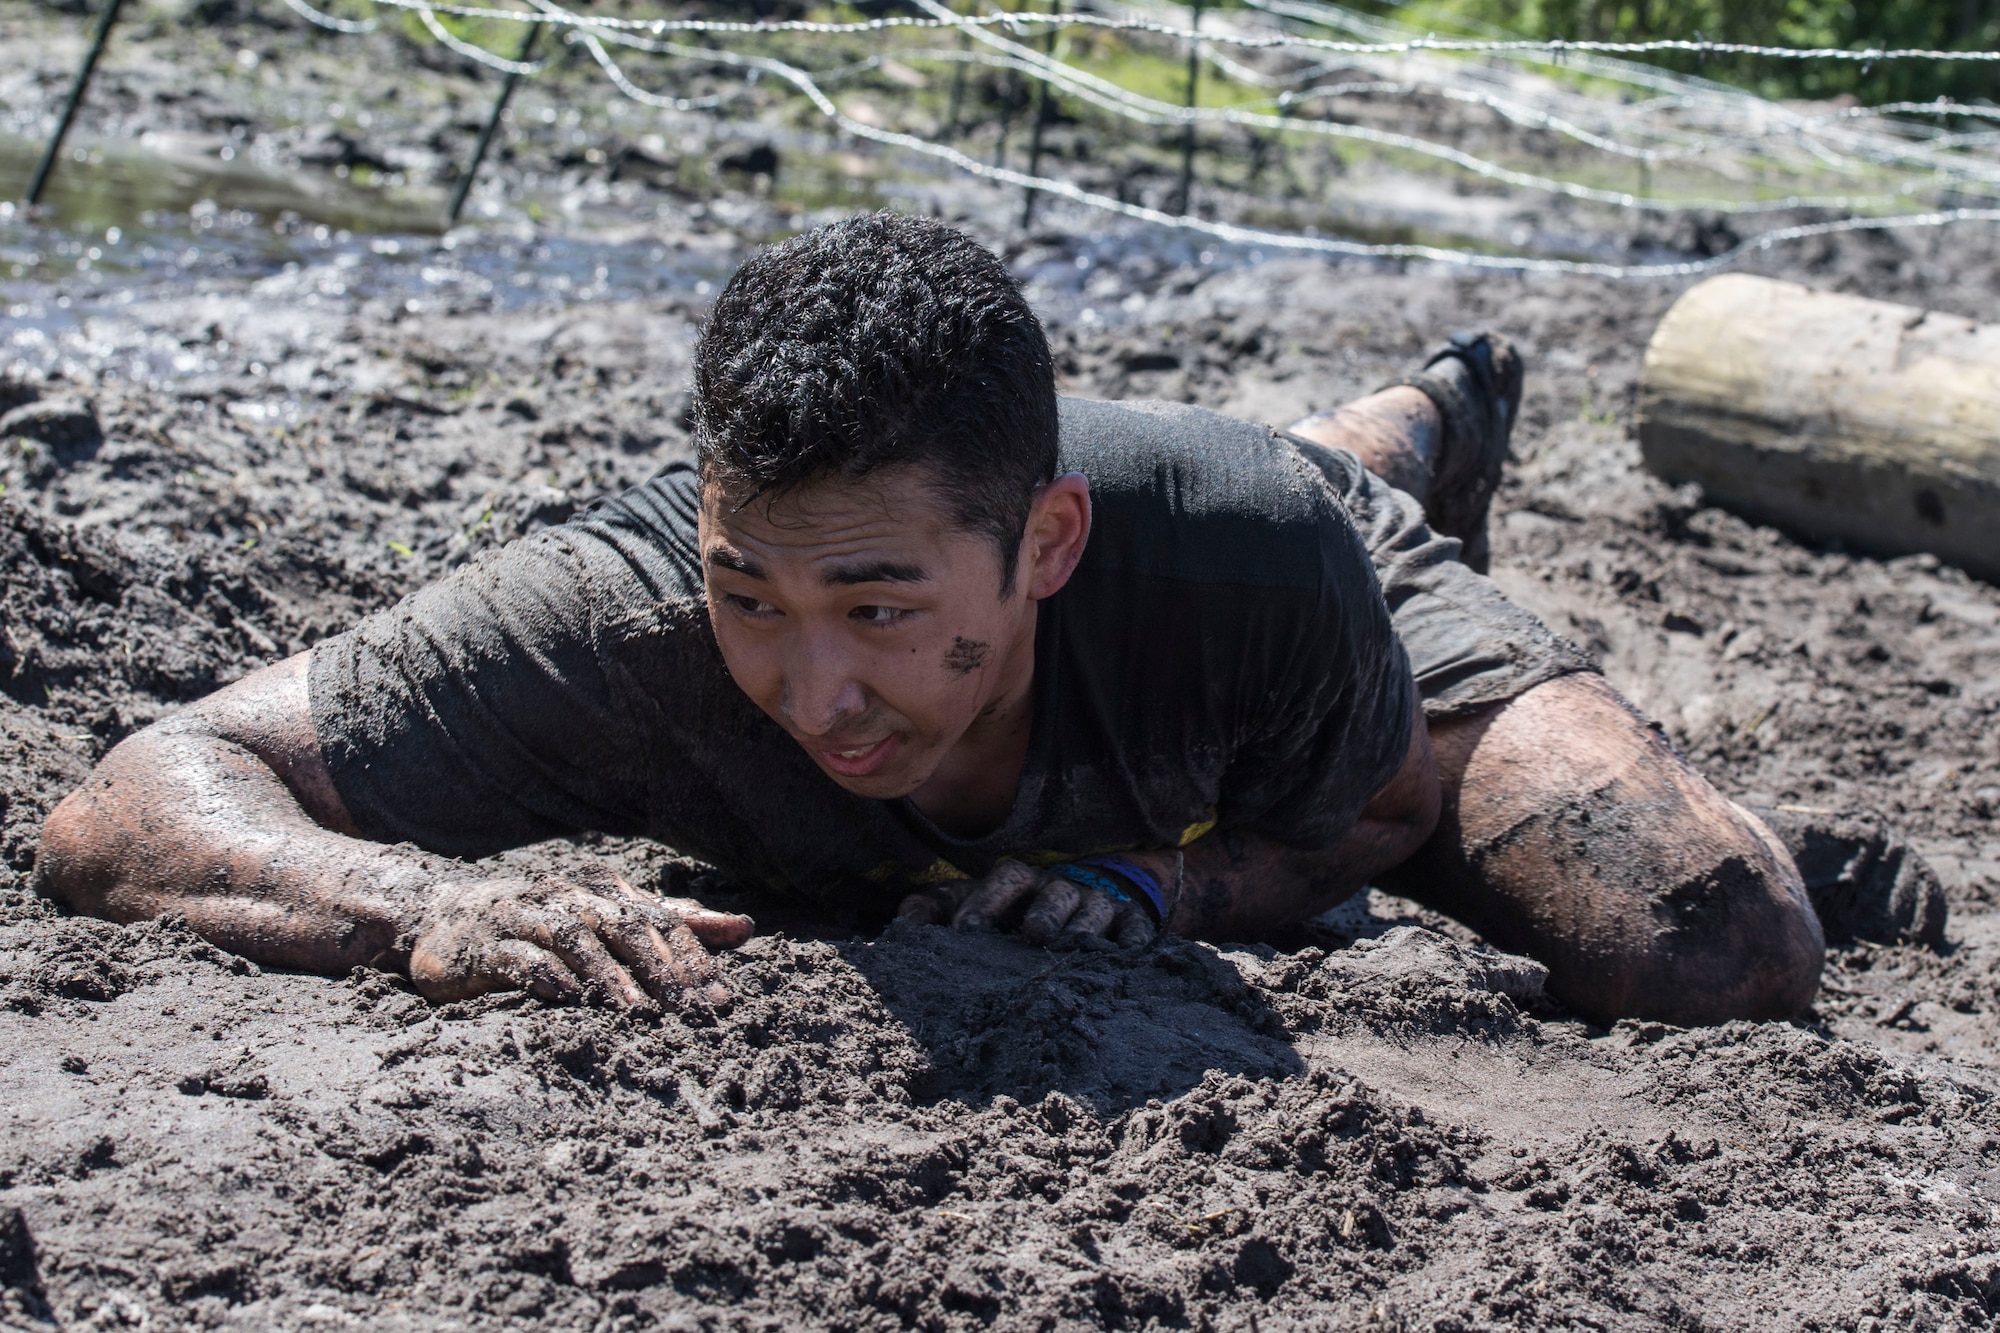 A Moody Mud Run participant low-crawls under barbed wire during the Moody Mud Run, May 6, 2017, in Ray City, Ga. The Fourth Annual Moody Mud consisted of both adult and child course that challenged more than 600 participants with obstacles over 4.2 miles. (U.S. Air Force photo by Staff Sgt. Eric Summers Jr.)